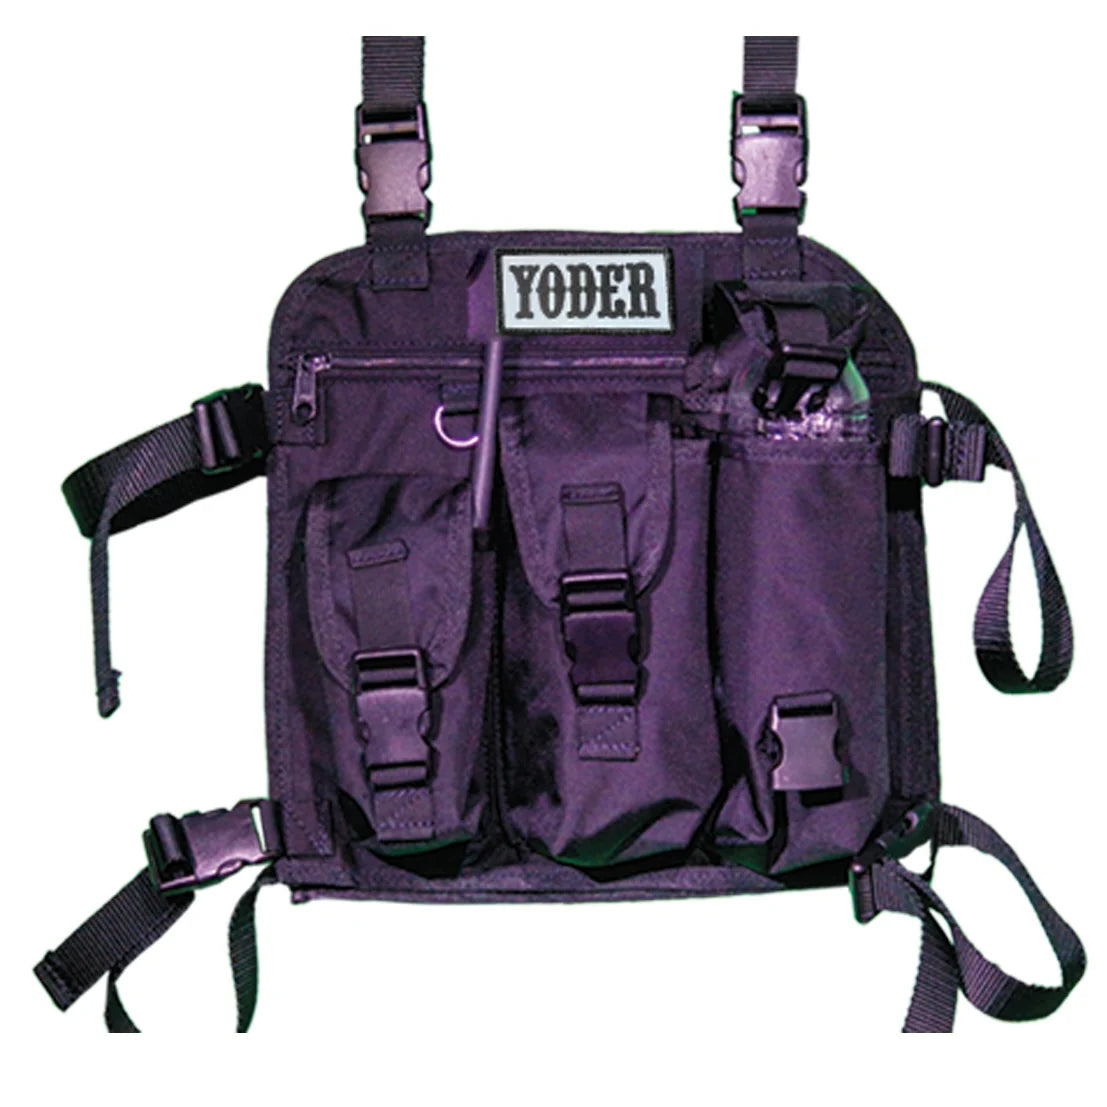 Yoder Chest Pack